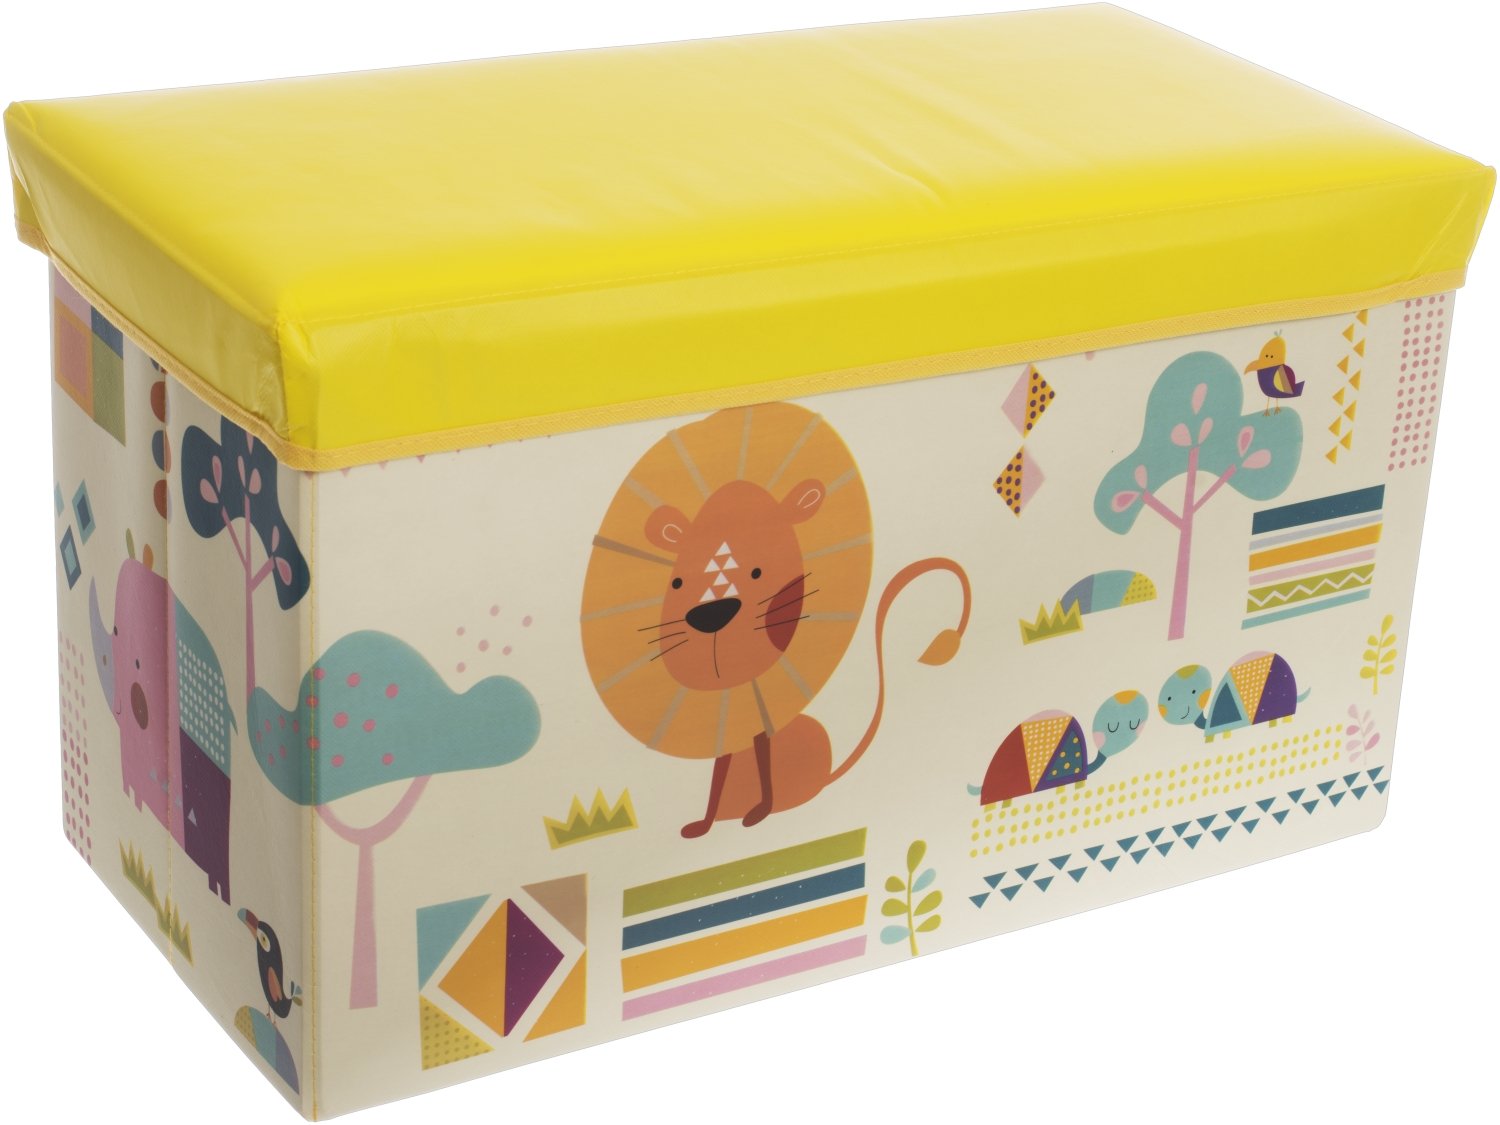 Bieco Folding Storage Box with Seat Bench Storage with Lid with Padded Zoo